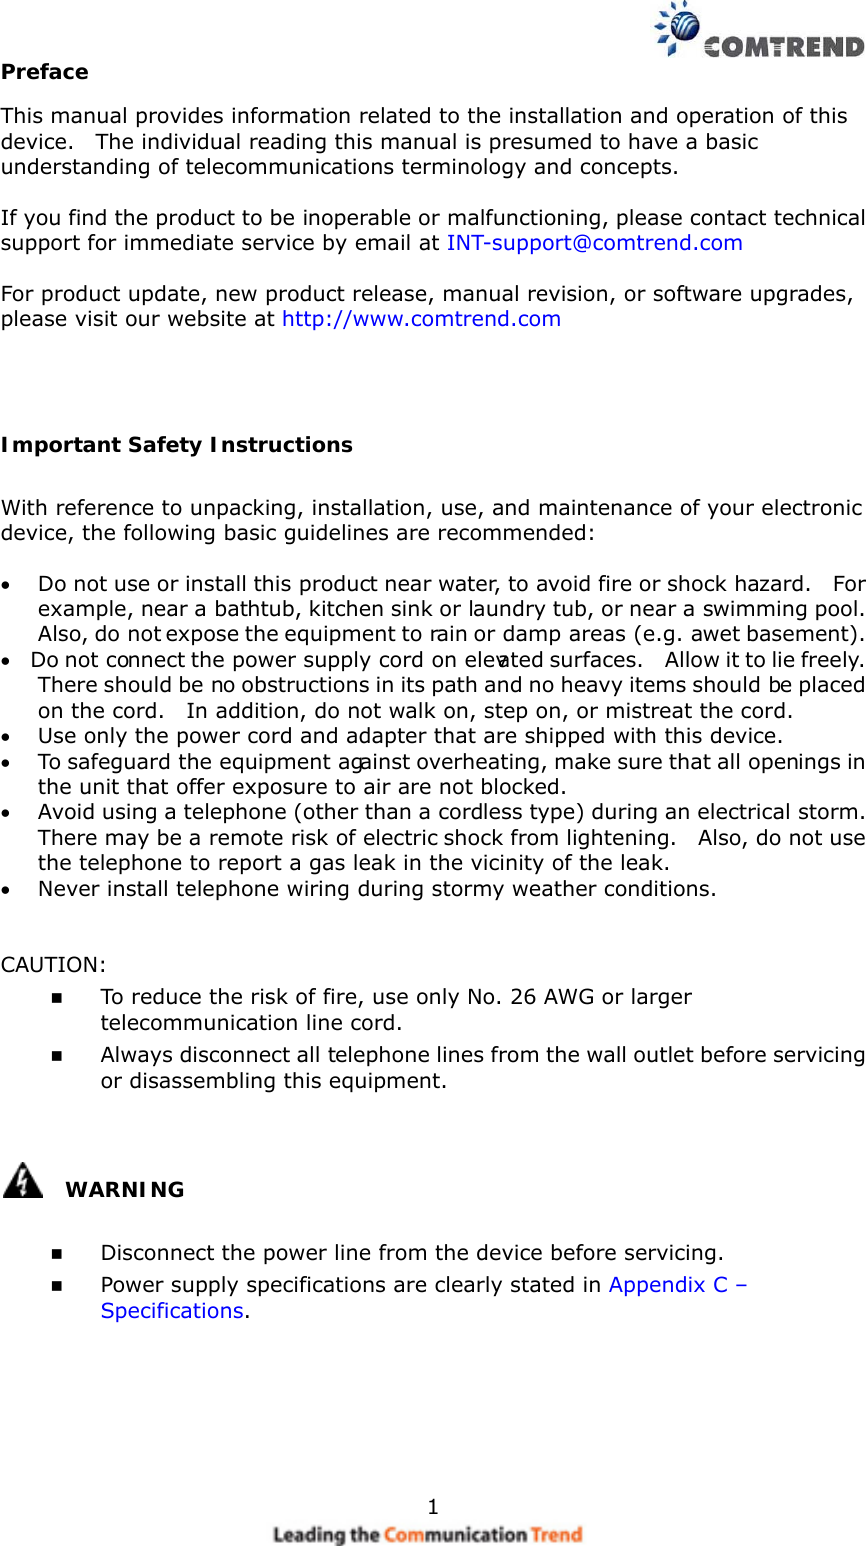    1Preface This manual provides information related to the installation and operation of this device.    The individual reading this manual is presumed to have a basic understanding of telecommunications terminology and concepts.      If you find the product to be inoperable or malfunctioning, please contact technical support for immediate service by email at INT-support@comtrend.com  For product update, new product release, manual revision, or software upgrades, please visit our website at http://www.comtrend.com   Important Safety Instructions With reference to unpacking, installation, use, and maintenance of your electronic device, the following basic guidelines are recommended:  •  Do not use or install this product near water, to avoid fire or shock hazard.    For example, near a bathtub, kitchen sink or laundry tub, or near a swimming pool.   Also, do not expose the equipment to rain or damp areas (e.g. a wet basement). •  Do not connect the power supply cord on elevated surfaces.    Allow it to lie freely.   There should be no obstructions in its path and no heavy items should be placed on the cord.    In addition, do not walk on, step on, or mistreat the cord. •  Use only the power cord and adapter that are shipped with this device. •  To safeguard the equipment against overheating, make sure that all openings in the unit that offer exposure to air are not blocked. •  Avoid using a telephone (other than a cordless type) during an electrical storm.   There may be a remote risk of electric shock from lightening.    Also, do not use the telephone to report a gas leak in the vicinity of the leak. •  Never install telephone wiring during stormy weather conditions.   CAUTION:   To reduce the risk of fire, use only No. 26 AWG or larger telecommunication line cord.   Always disconnect all telephone lines from the wall outlet before servicing or disassembling this equipment.    WARNING   Disconnect the power line from the device before servicing.     Power supply specifications are clearly stated in Appendix C – Specifications.    